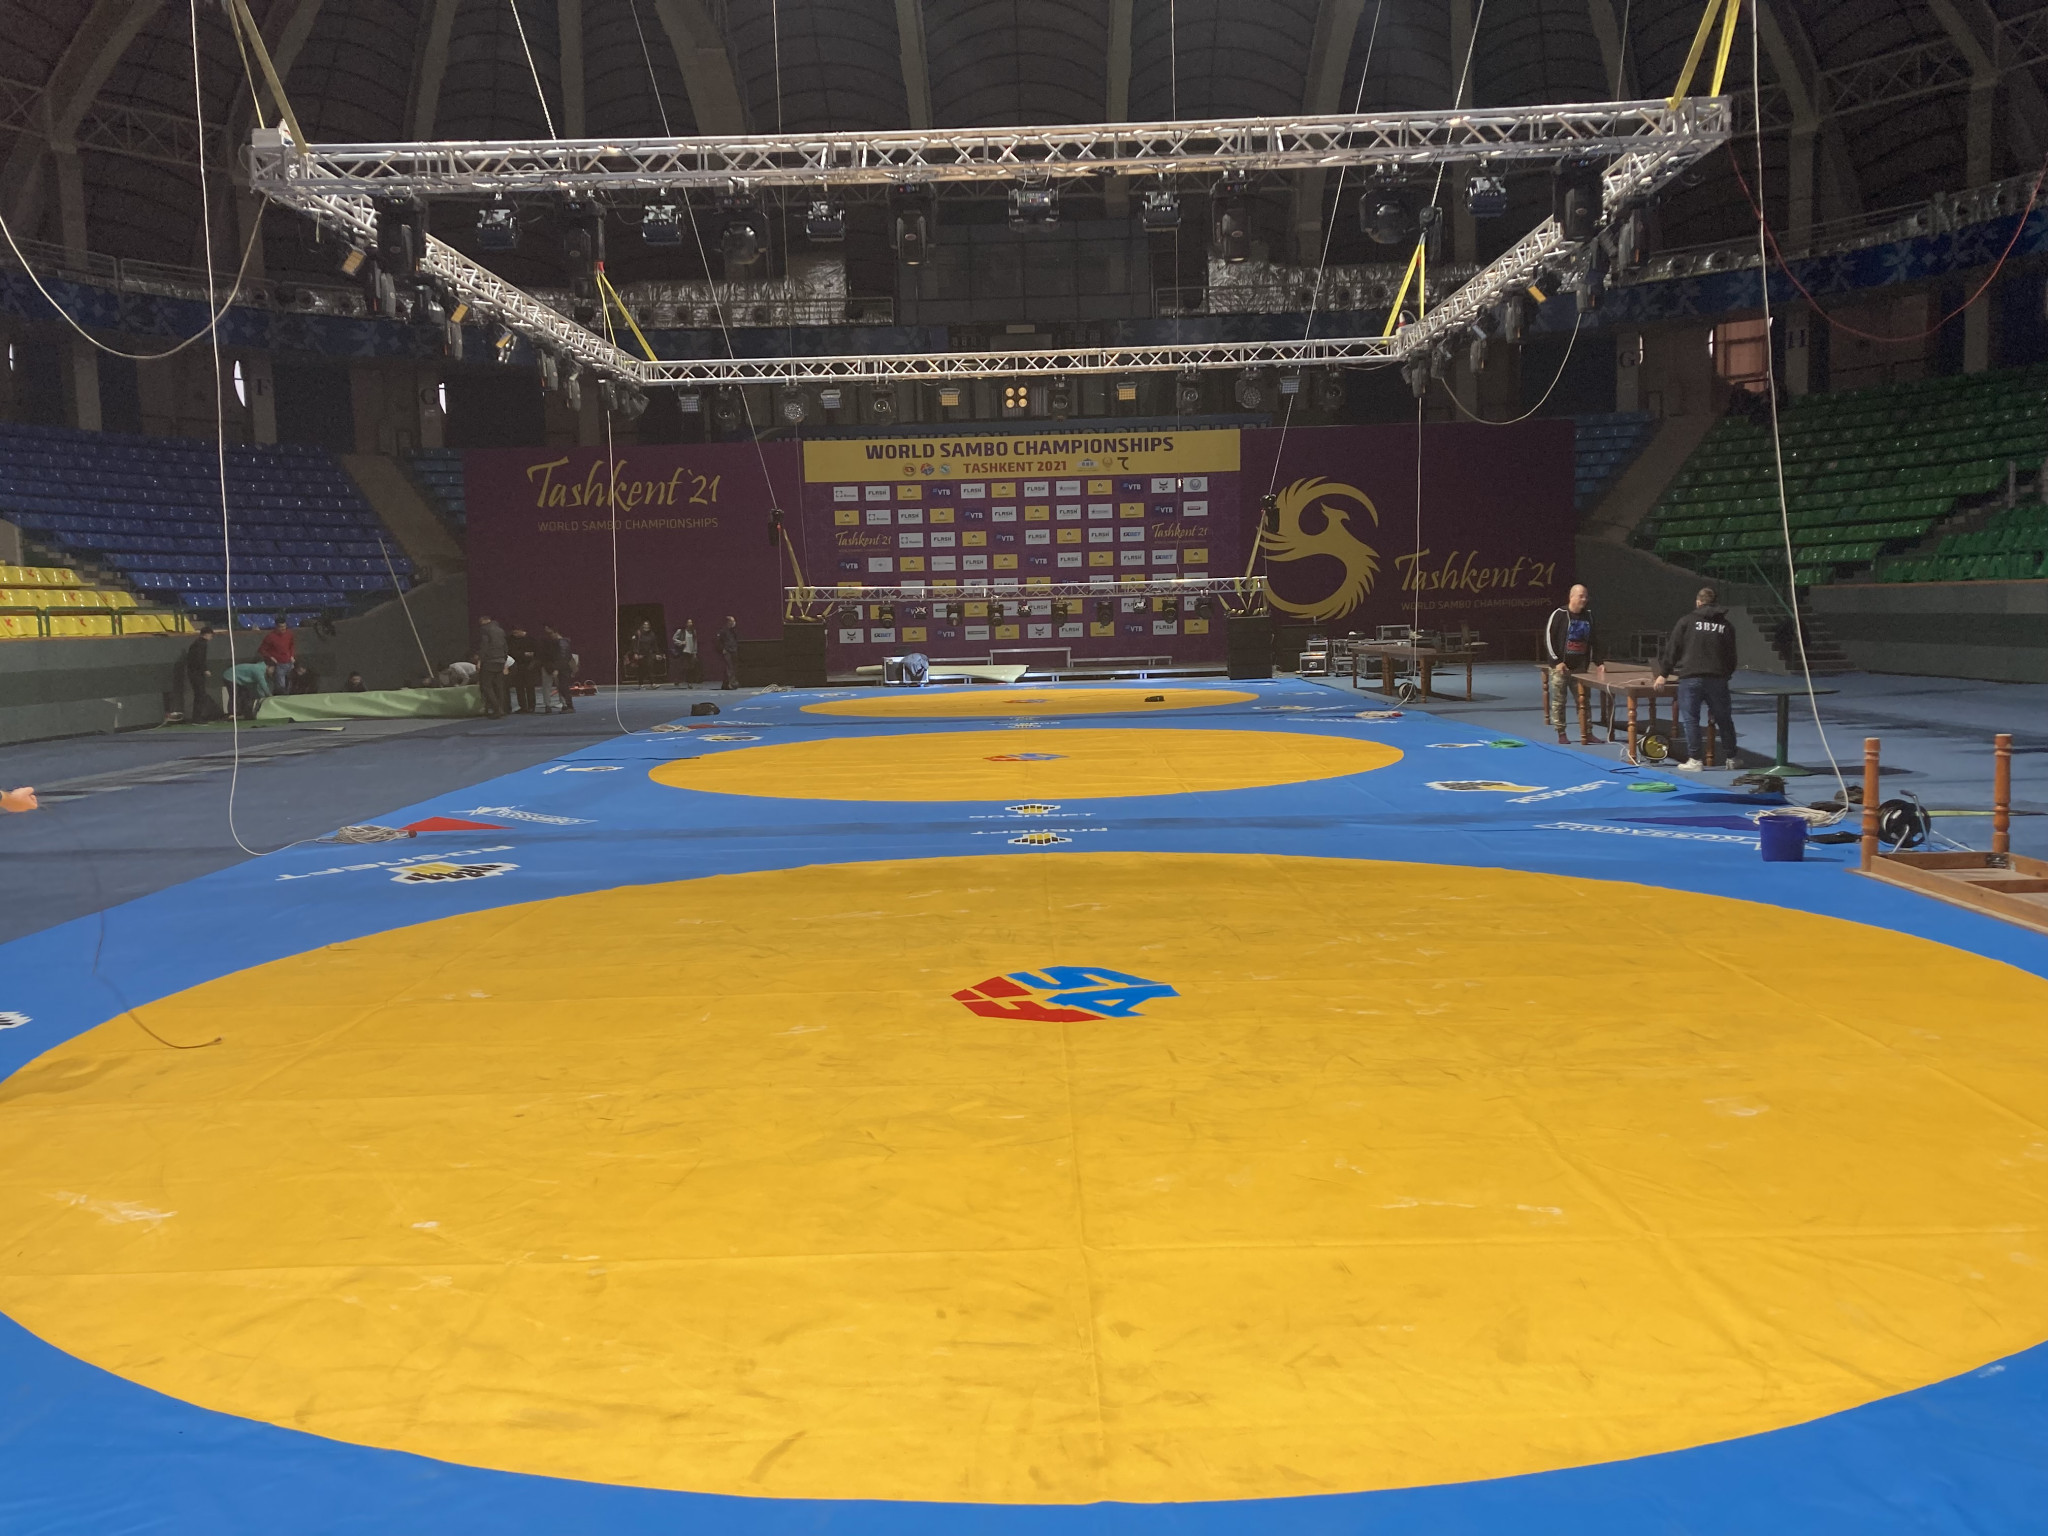 Final preparations are being made prior to the start of the World Sambo Championships ©ITG